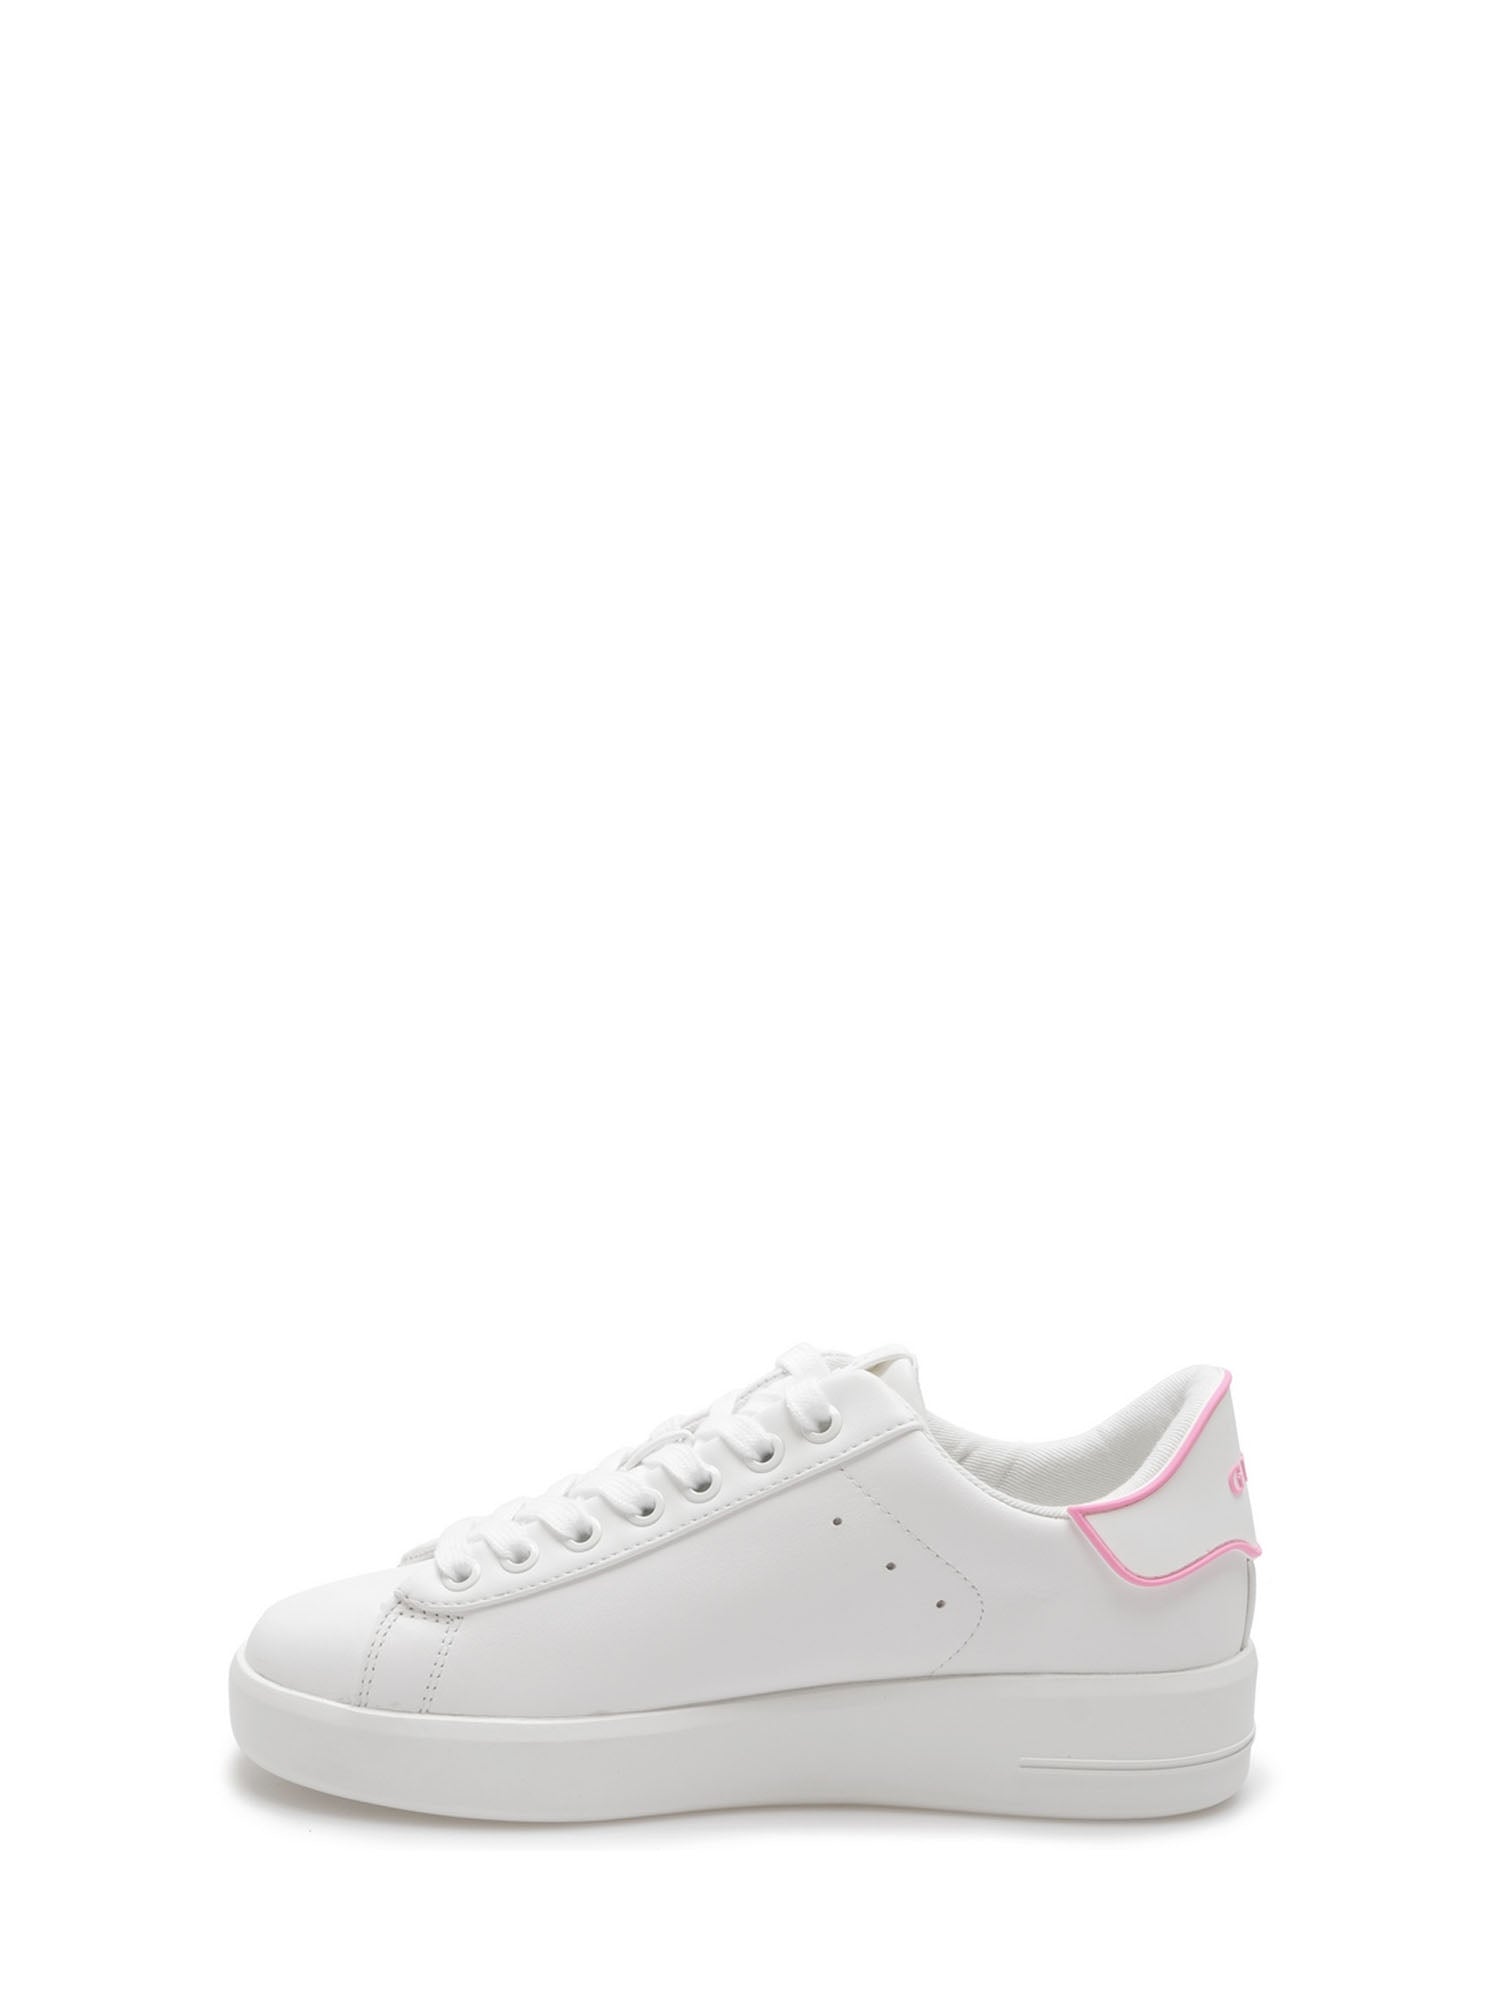 GUESS JEANS SNEAKERS ROCKIES BIANCO - FUXIA